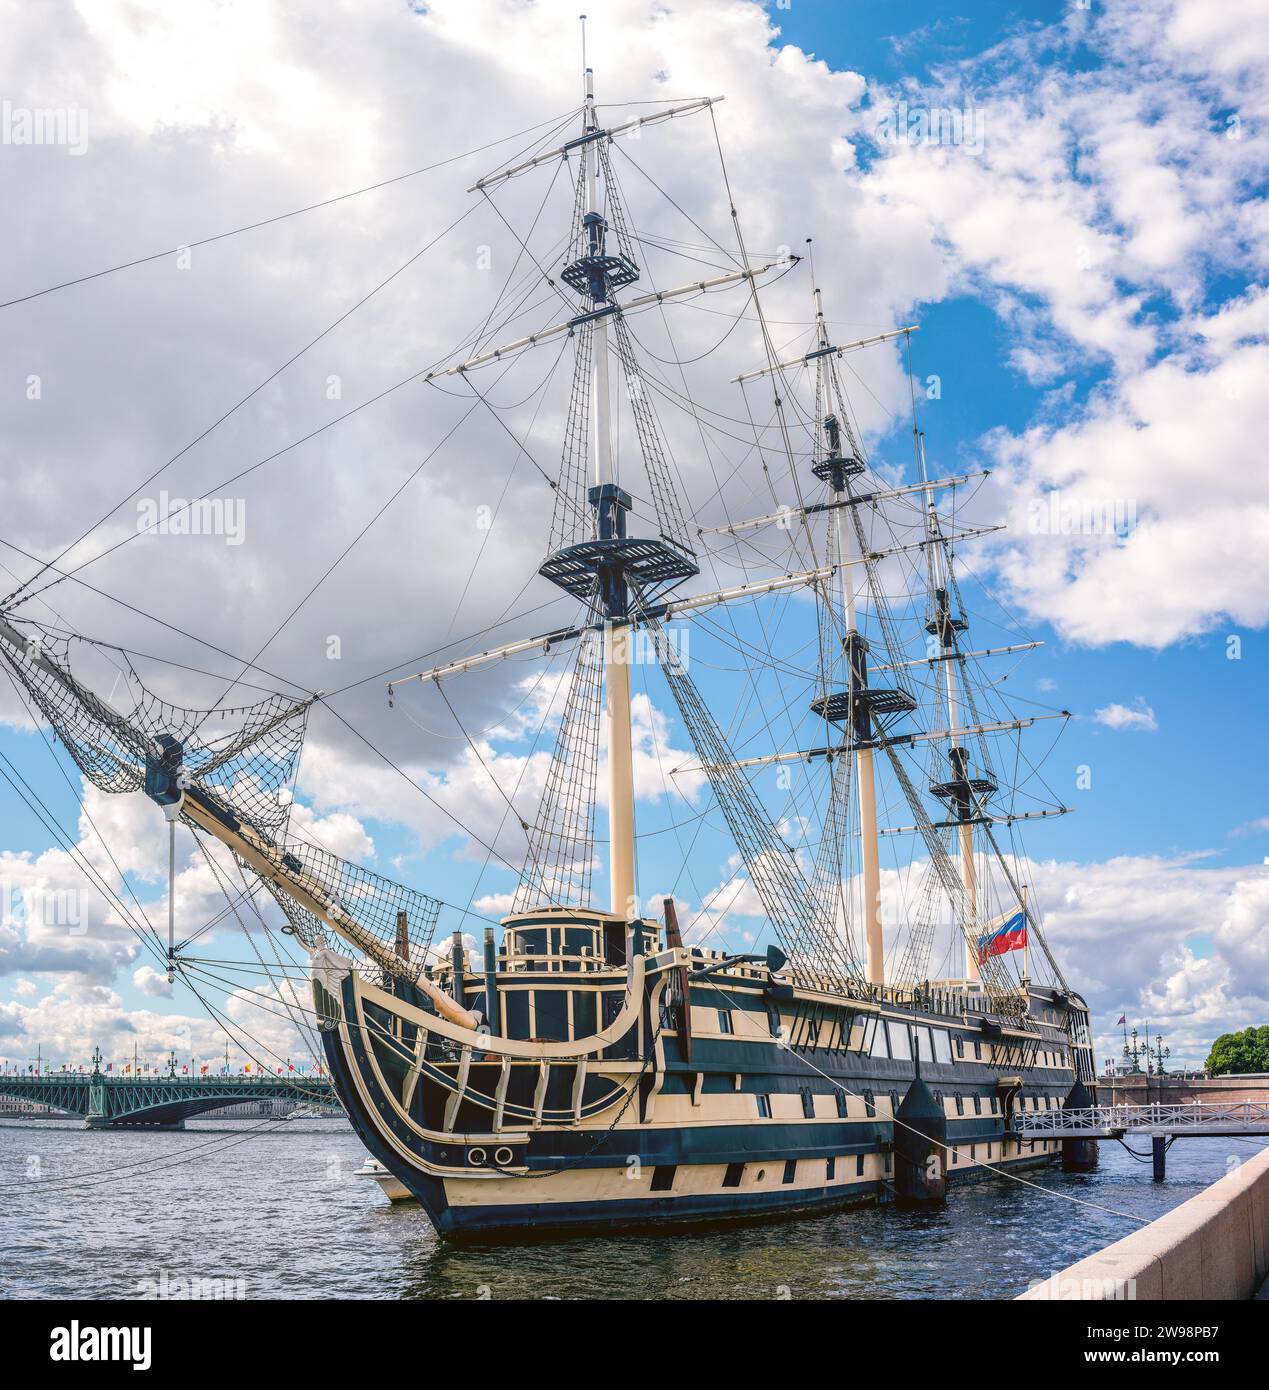 Image of a warship in St. Petersburg. Tourism concept Stock Photo